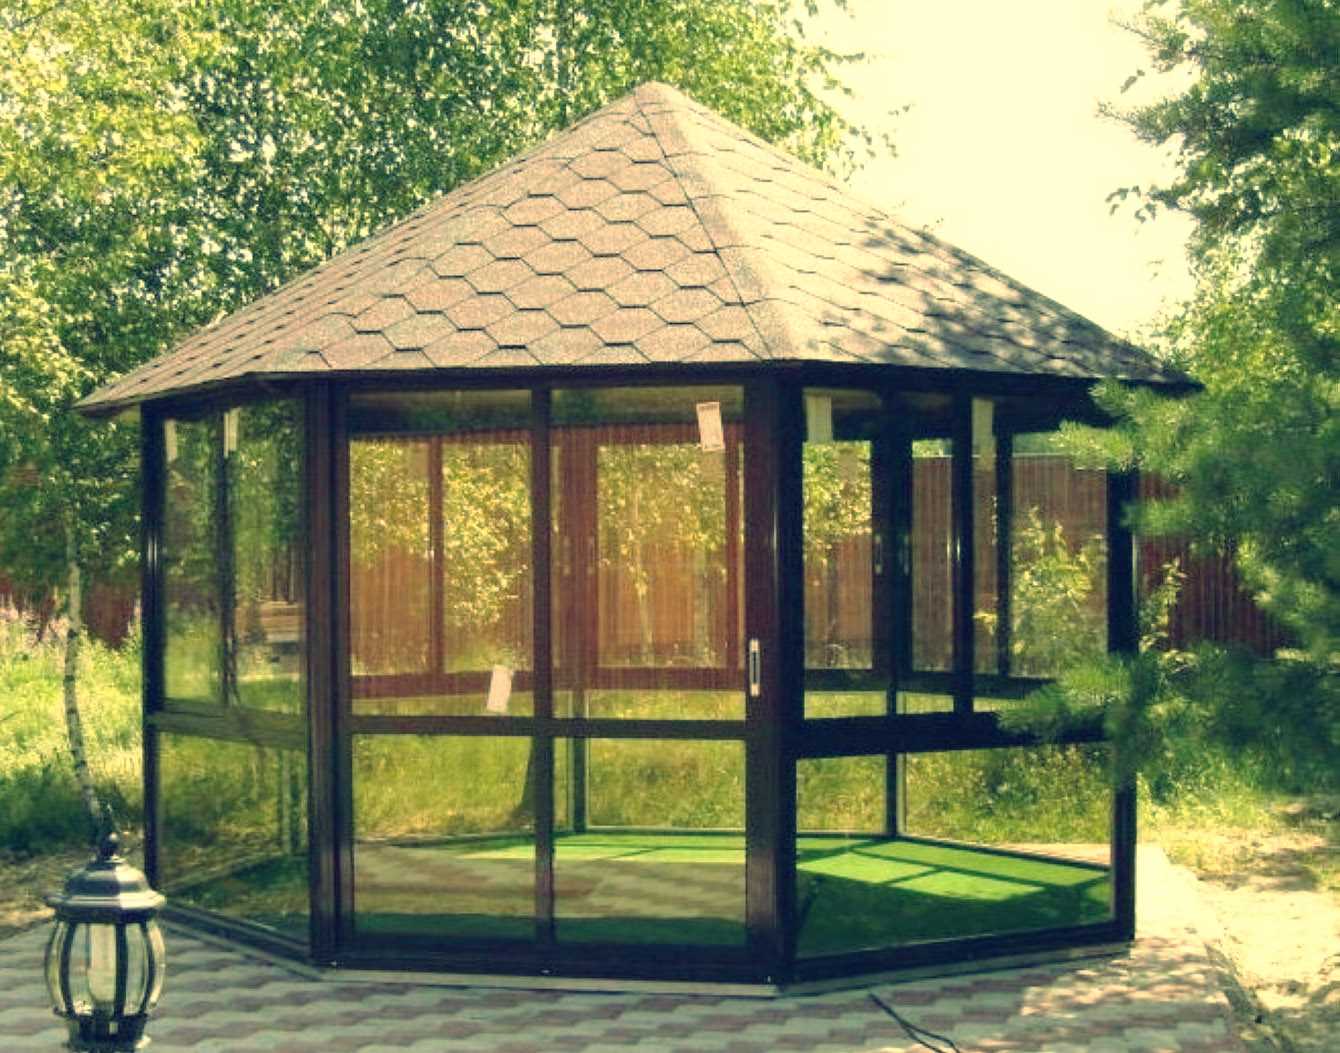 version of the modern style of the gazebo in the yard